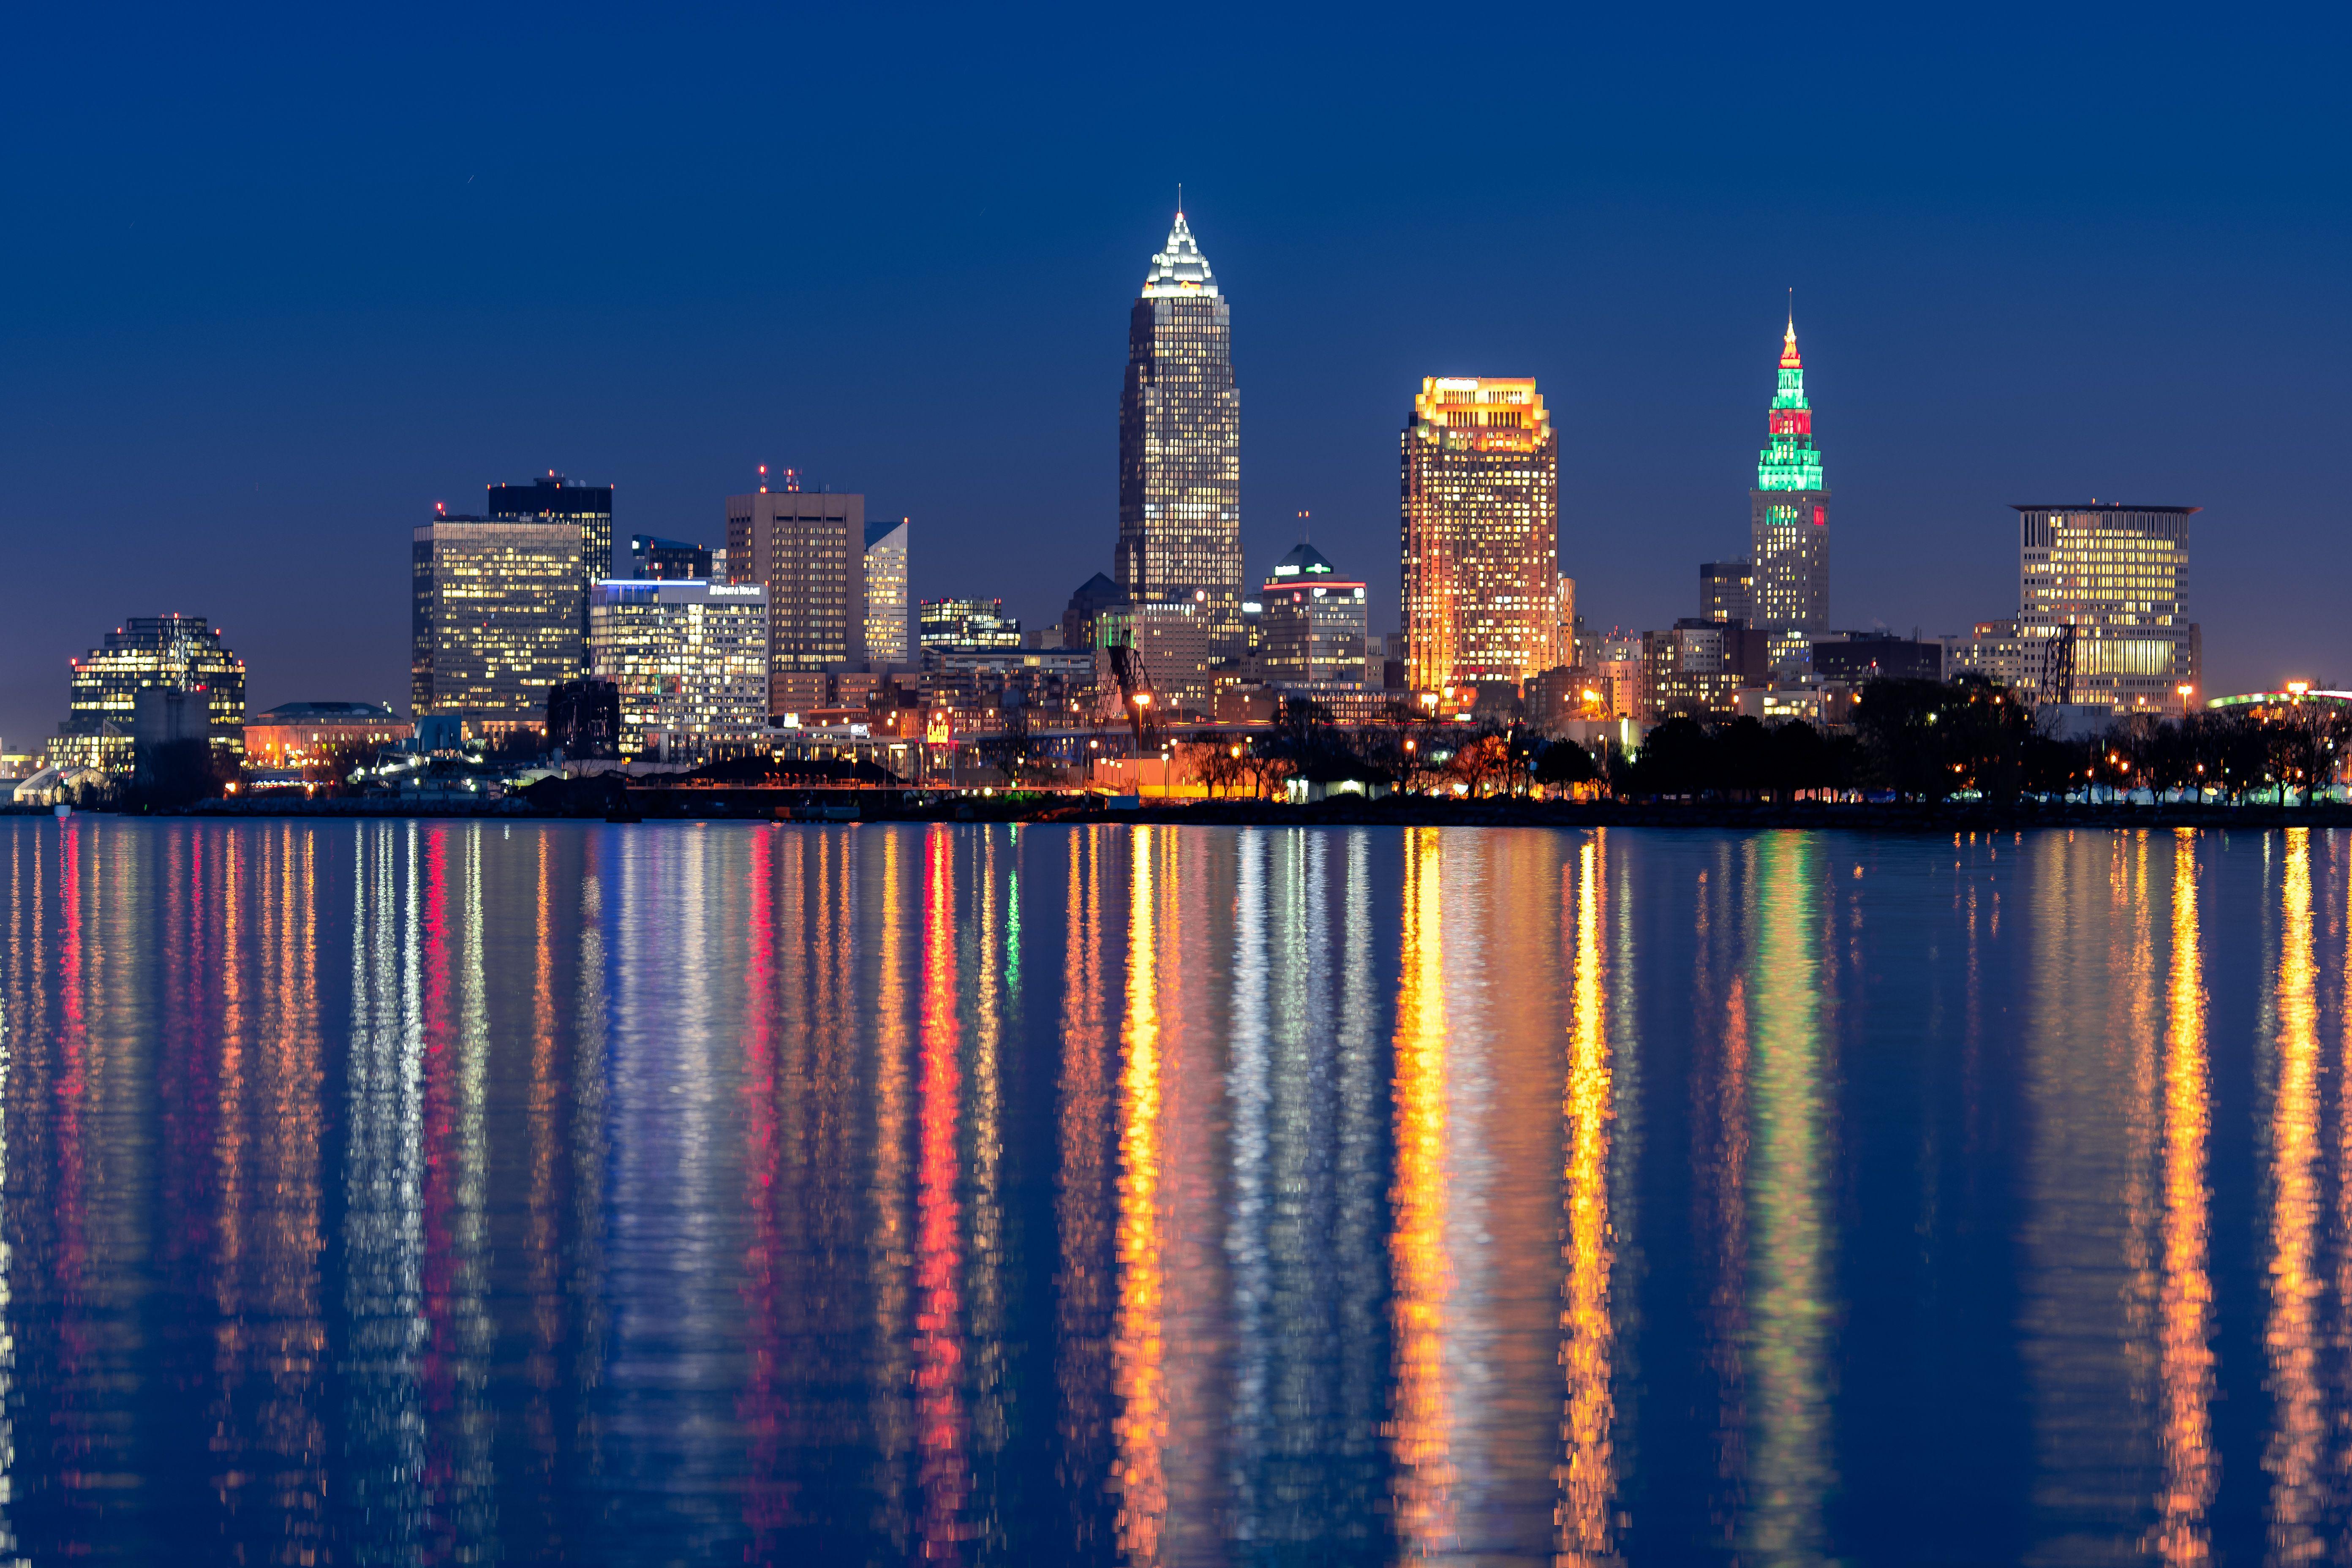 Cleveland Wallpapers Top Free Cleveland Backgrounds Images, Photos, Reviews